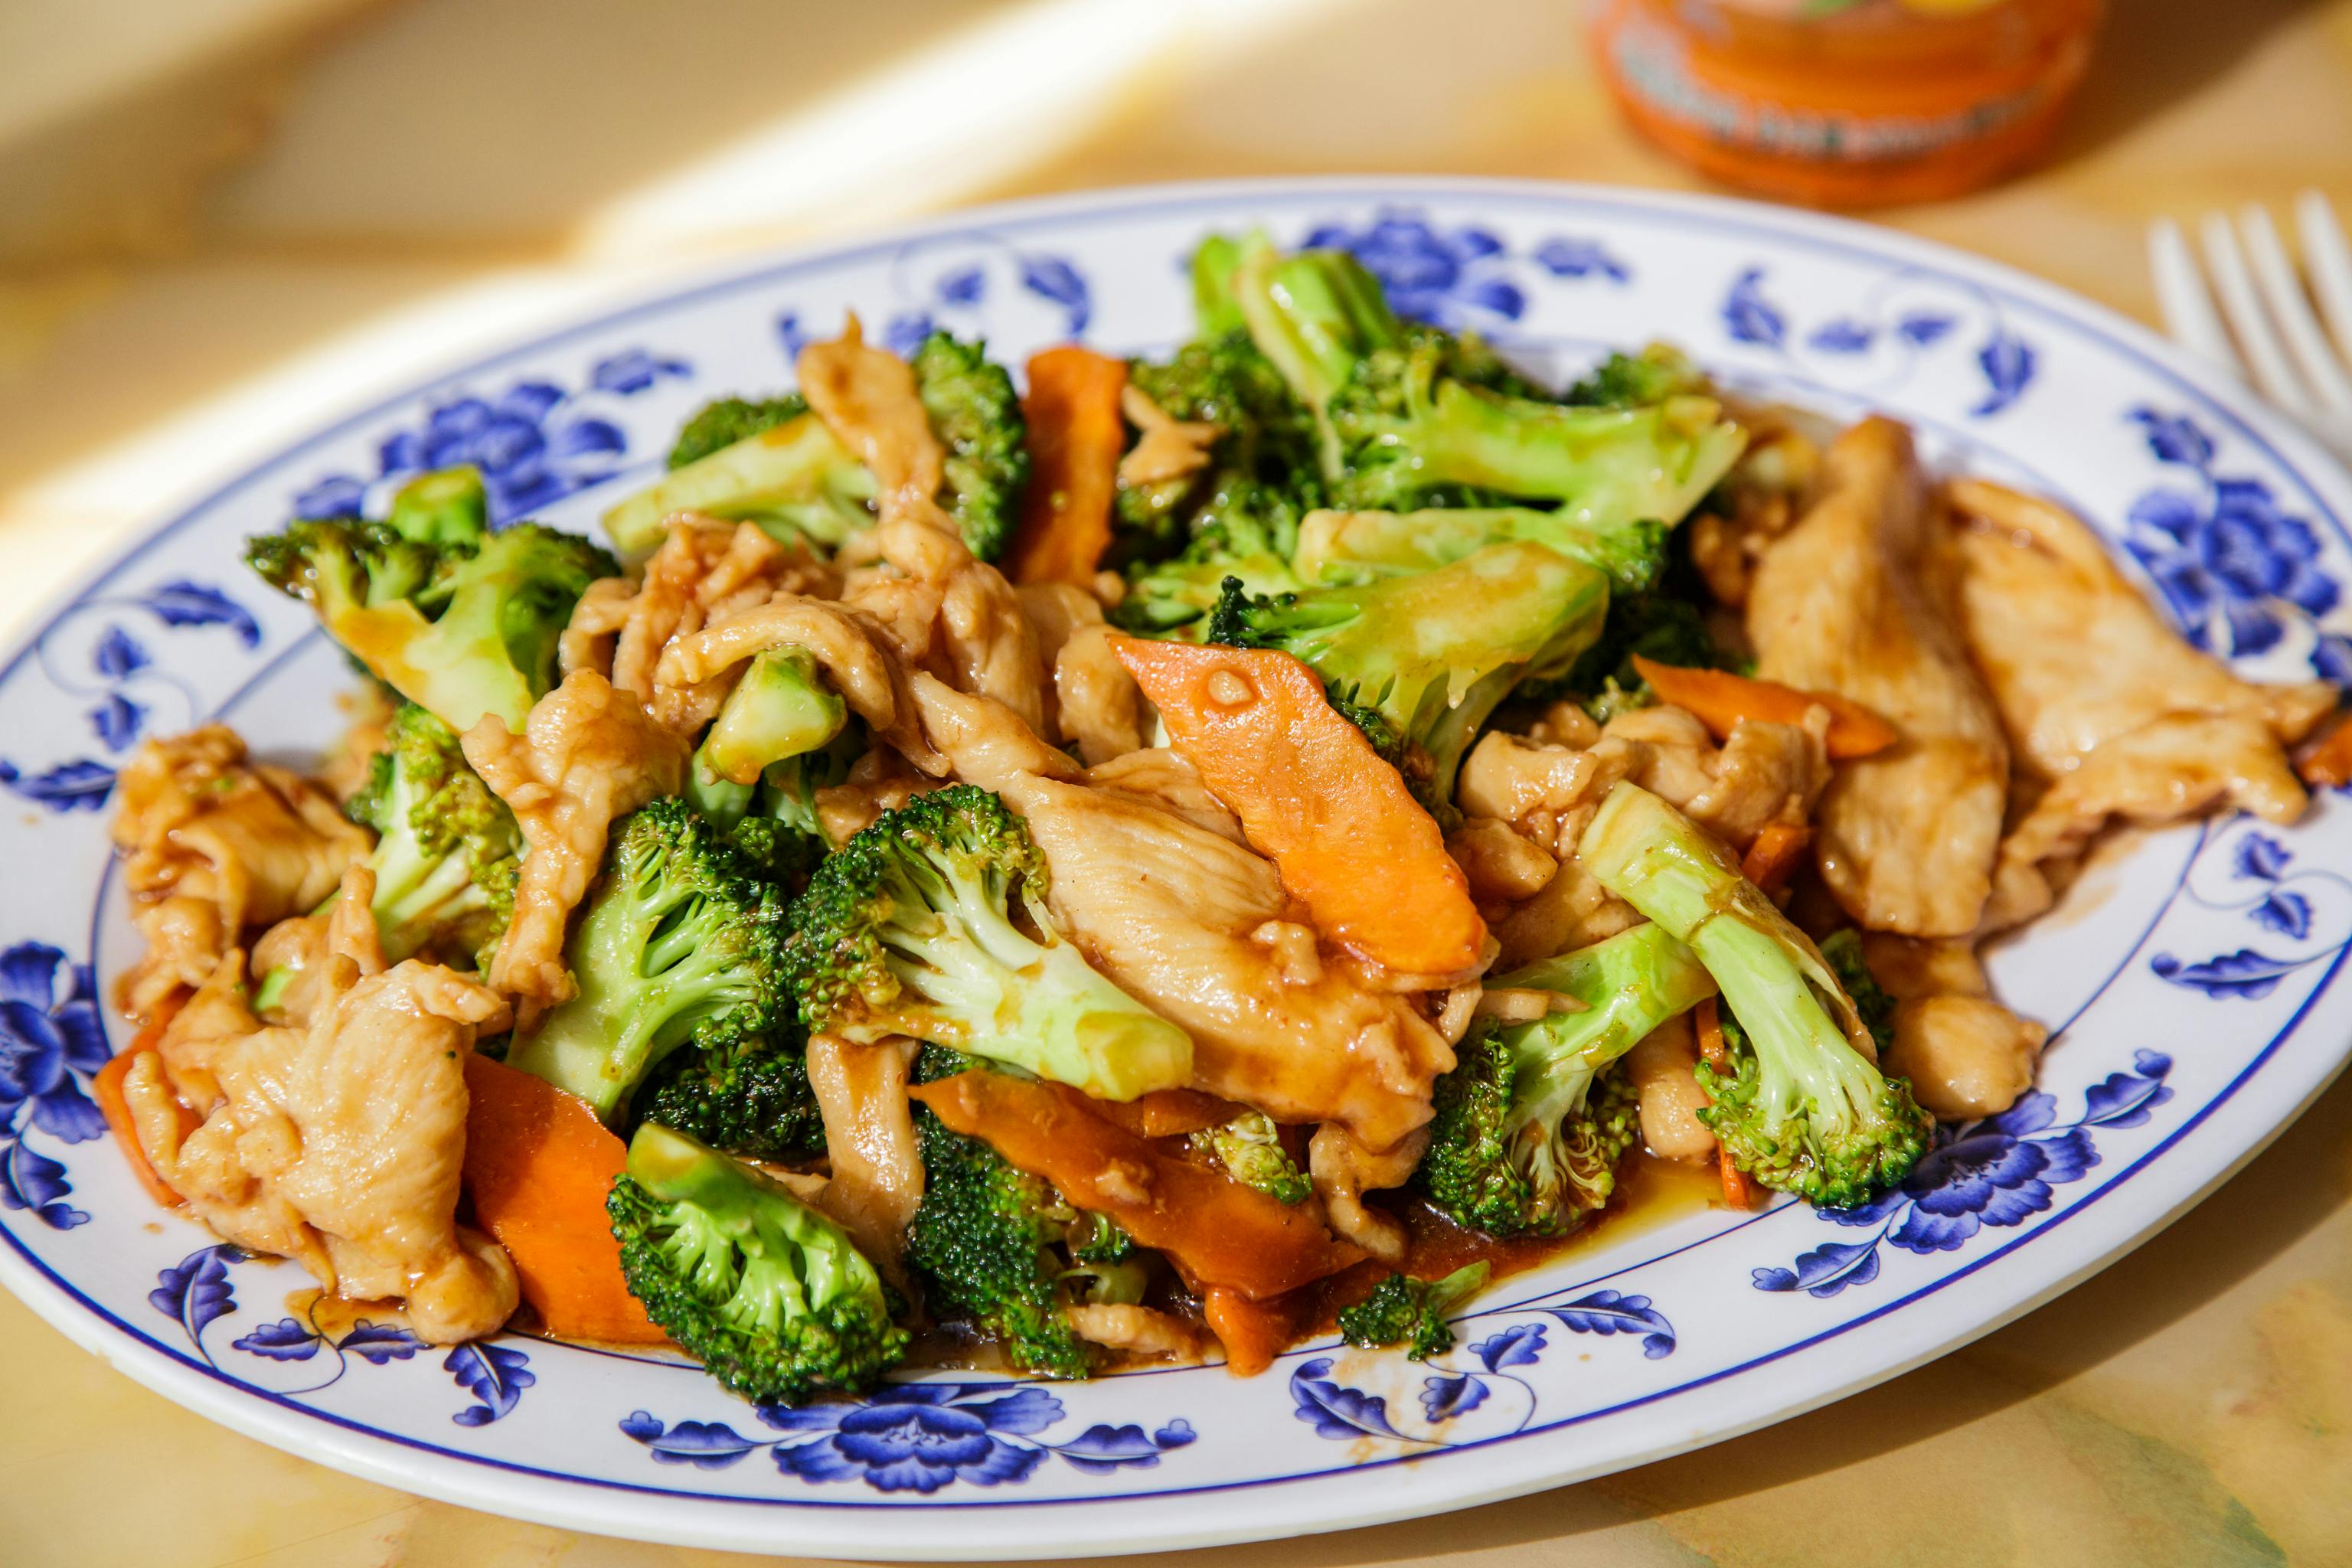 K1. Chicken with Broccoli from 88 China - Authentic Chinese in Madison, WI